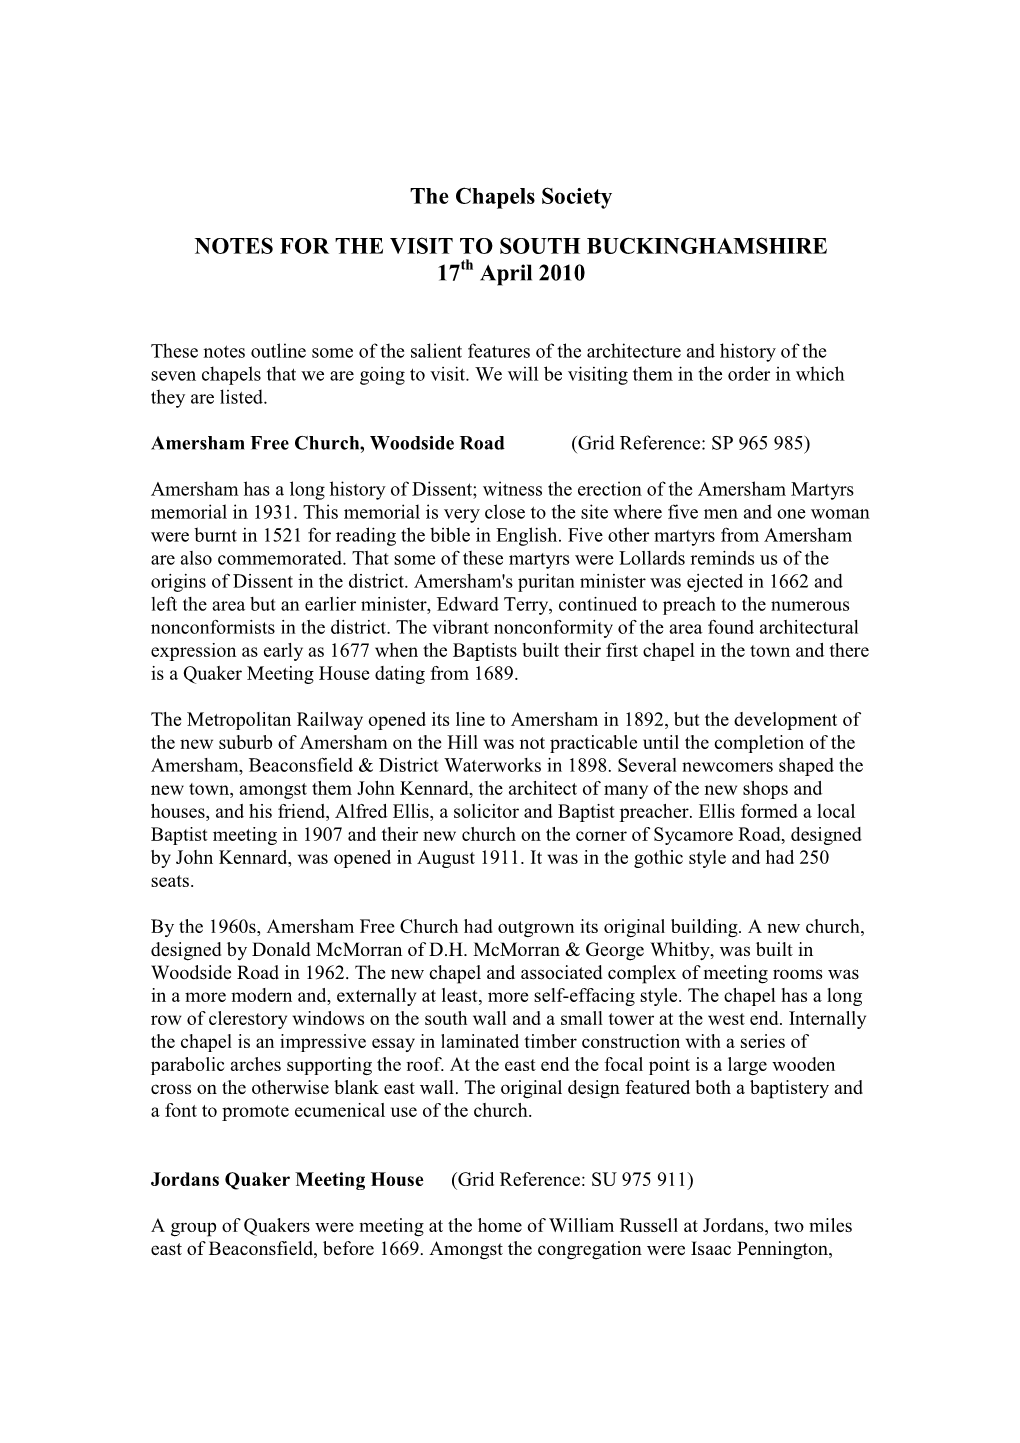 South Buckinghamshire Notes